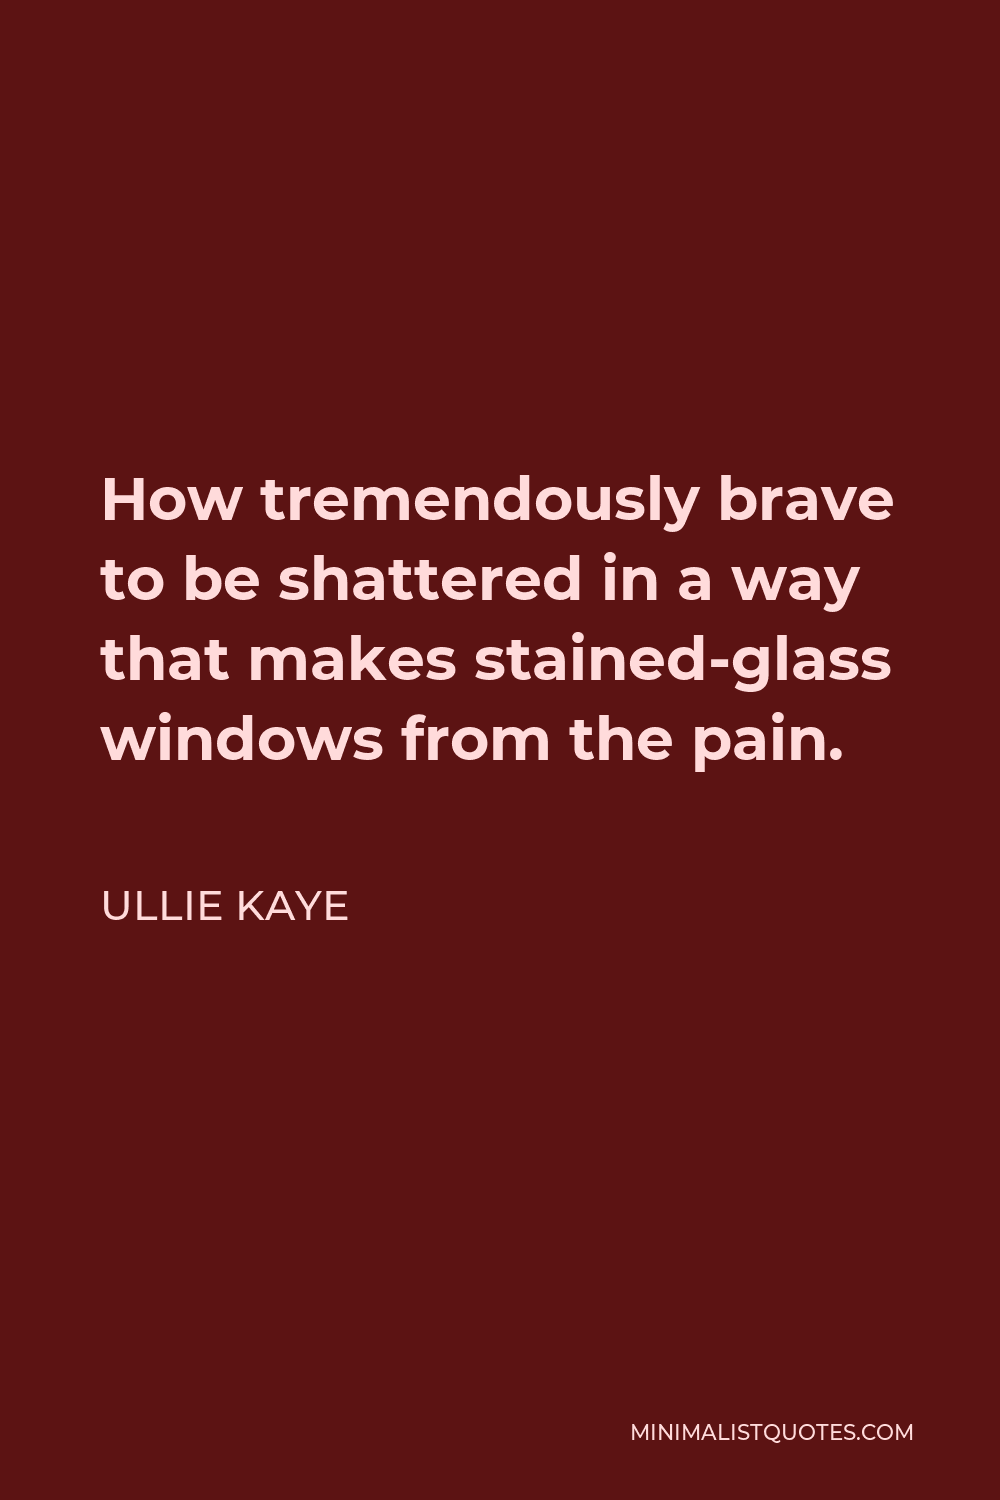 Ullie Kaye Quote - How tremendously brave to be shattered in a way that makes stained-glass windows from the pain.